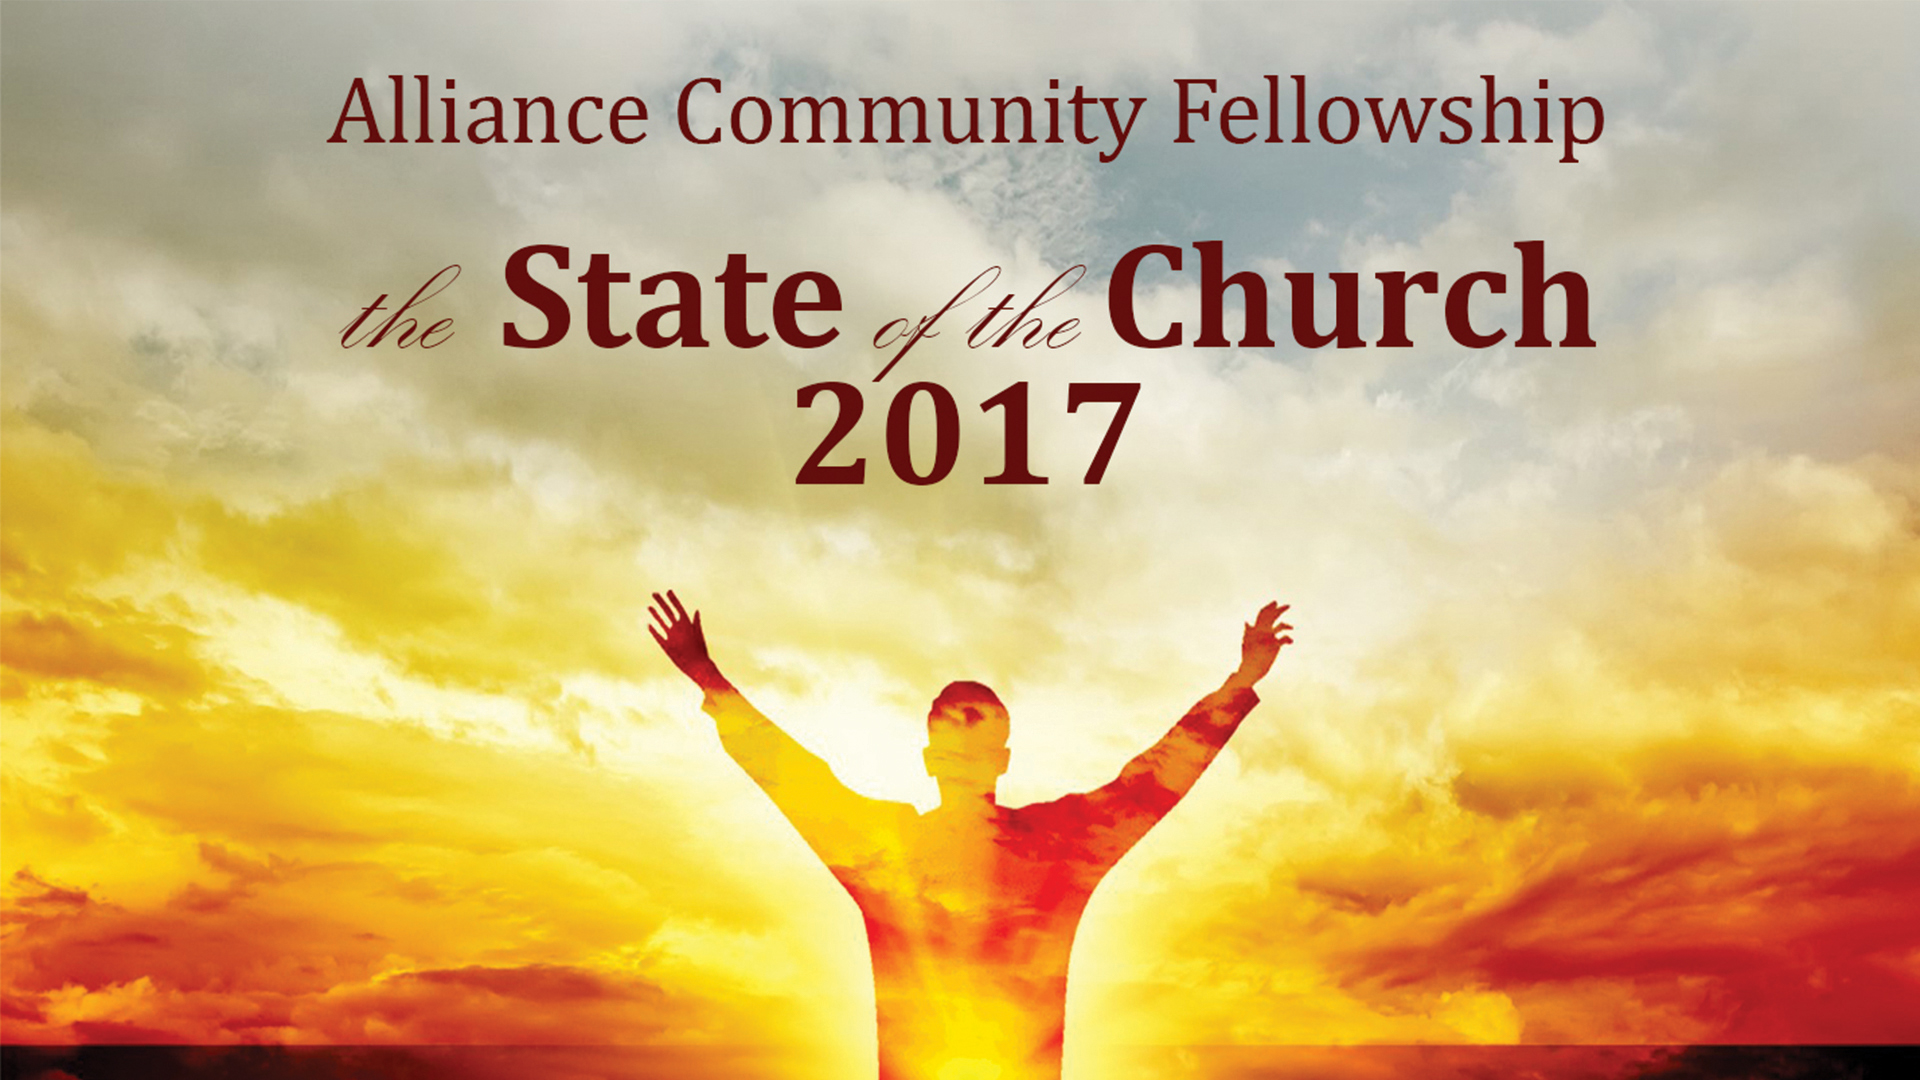 01-15-17-The_State_Of_The_Church_2017